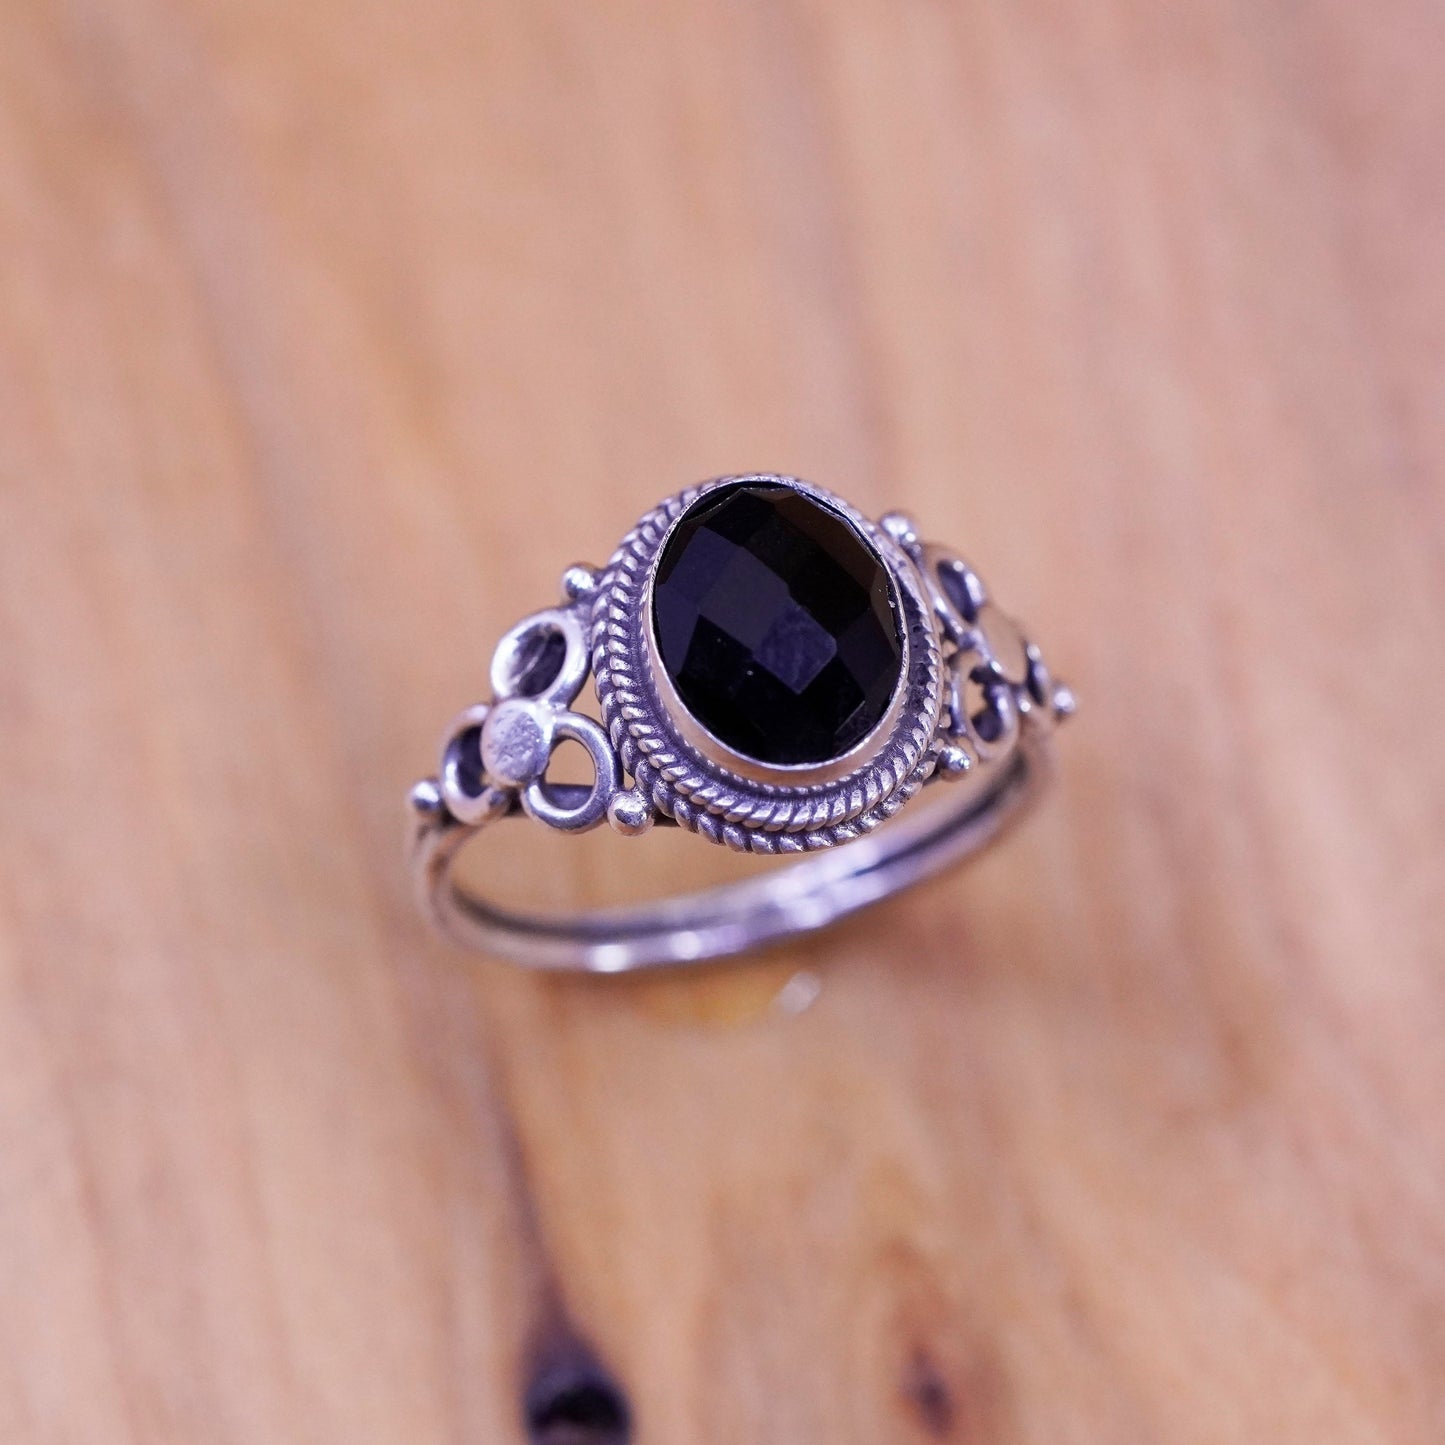 Size 6.75, vintage Sterling 925 silver handmade ring with obsidian and beads